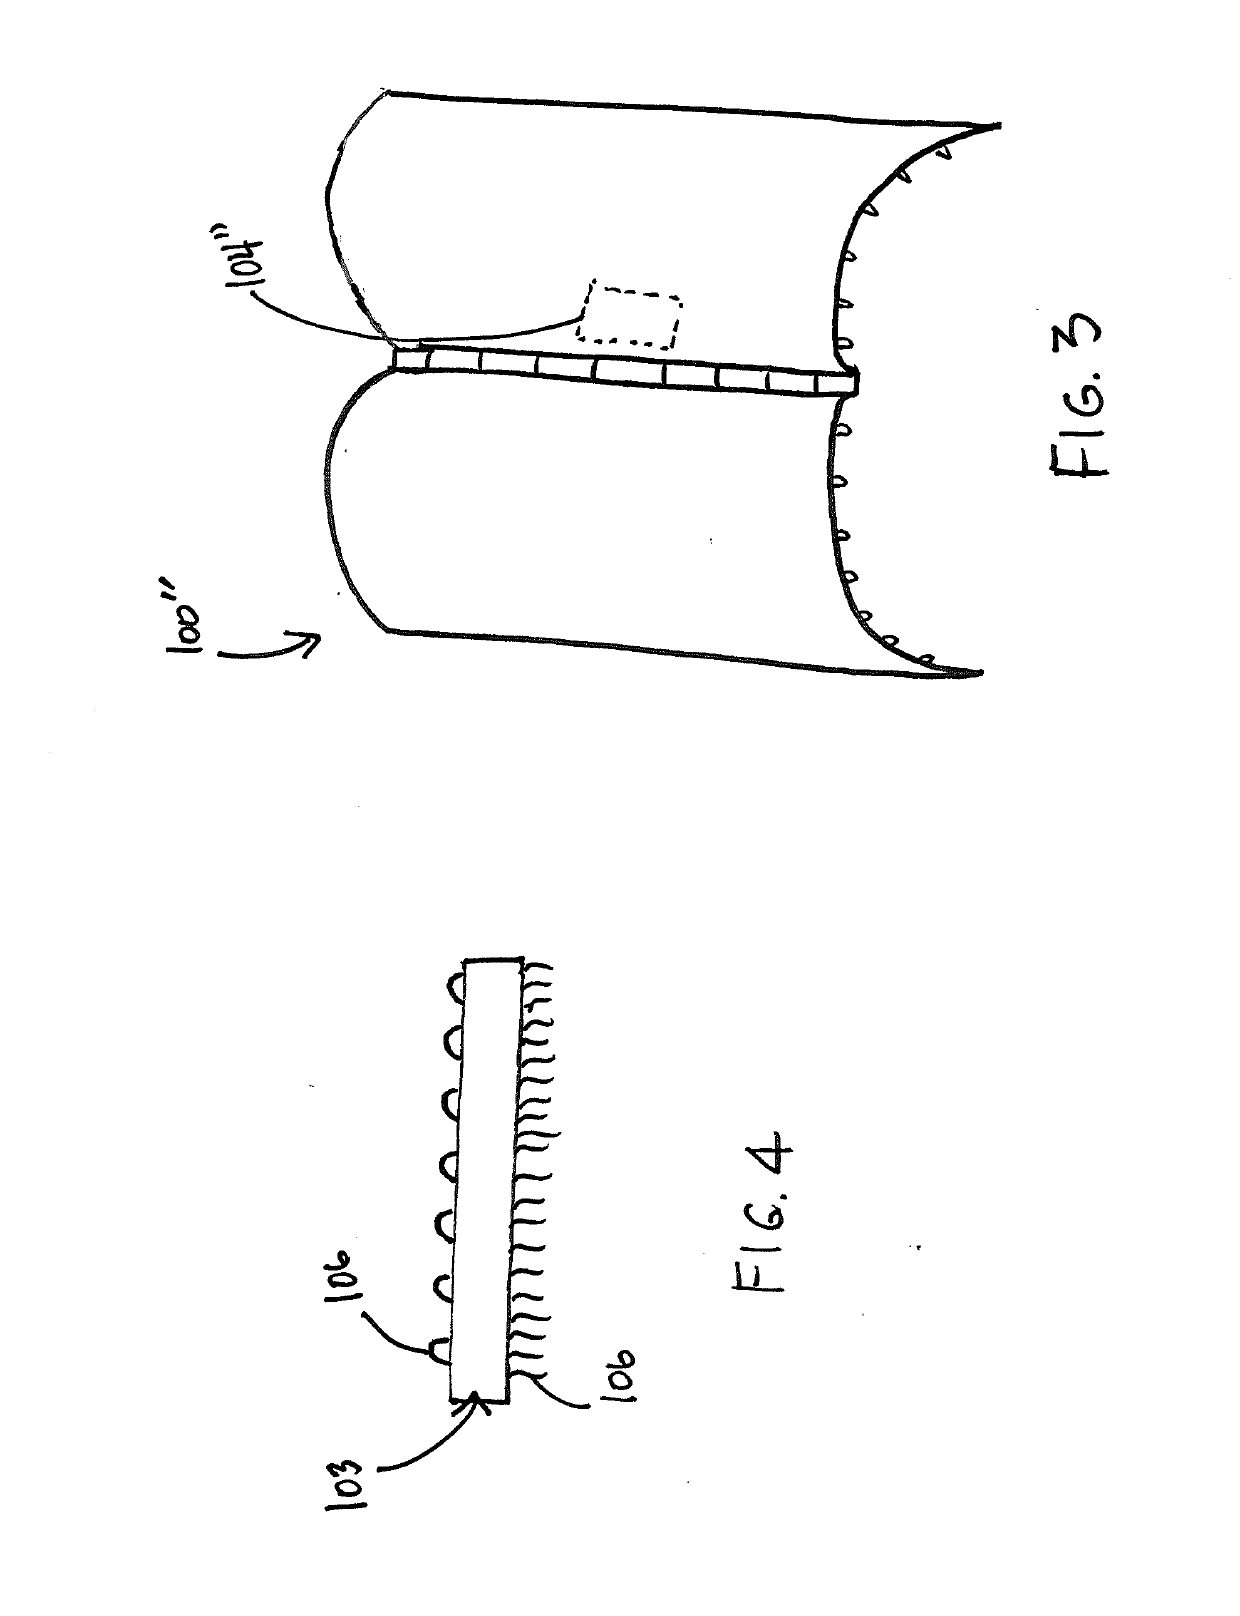 Preemptive pain avoidance and/or diagnostic apparatus and methods of operating same